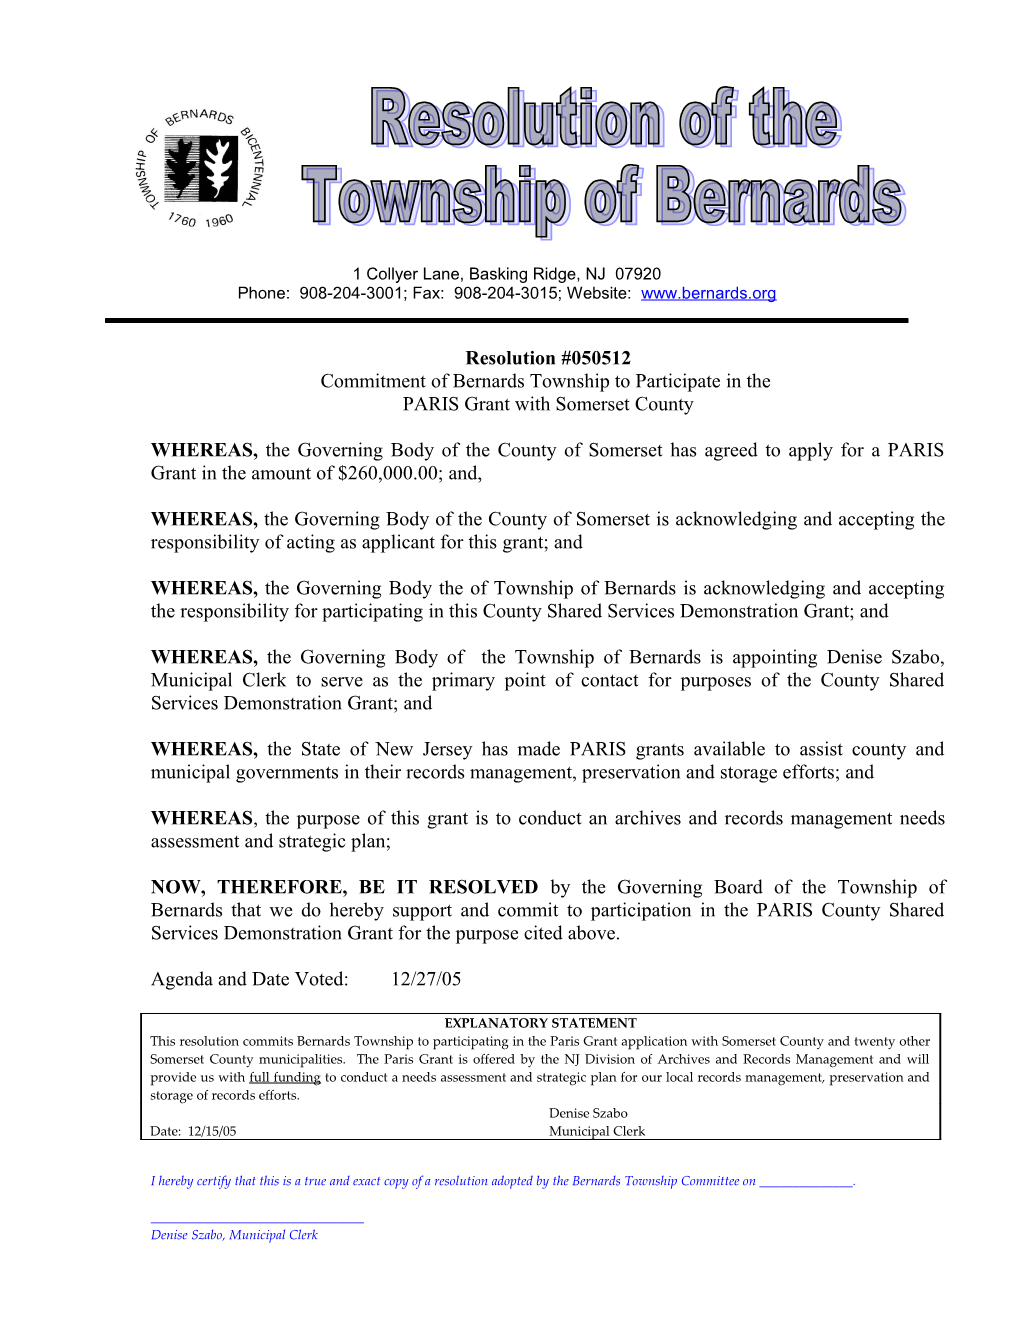 Commitment of Bernards Township to Participate in The